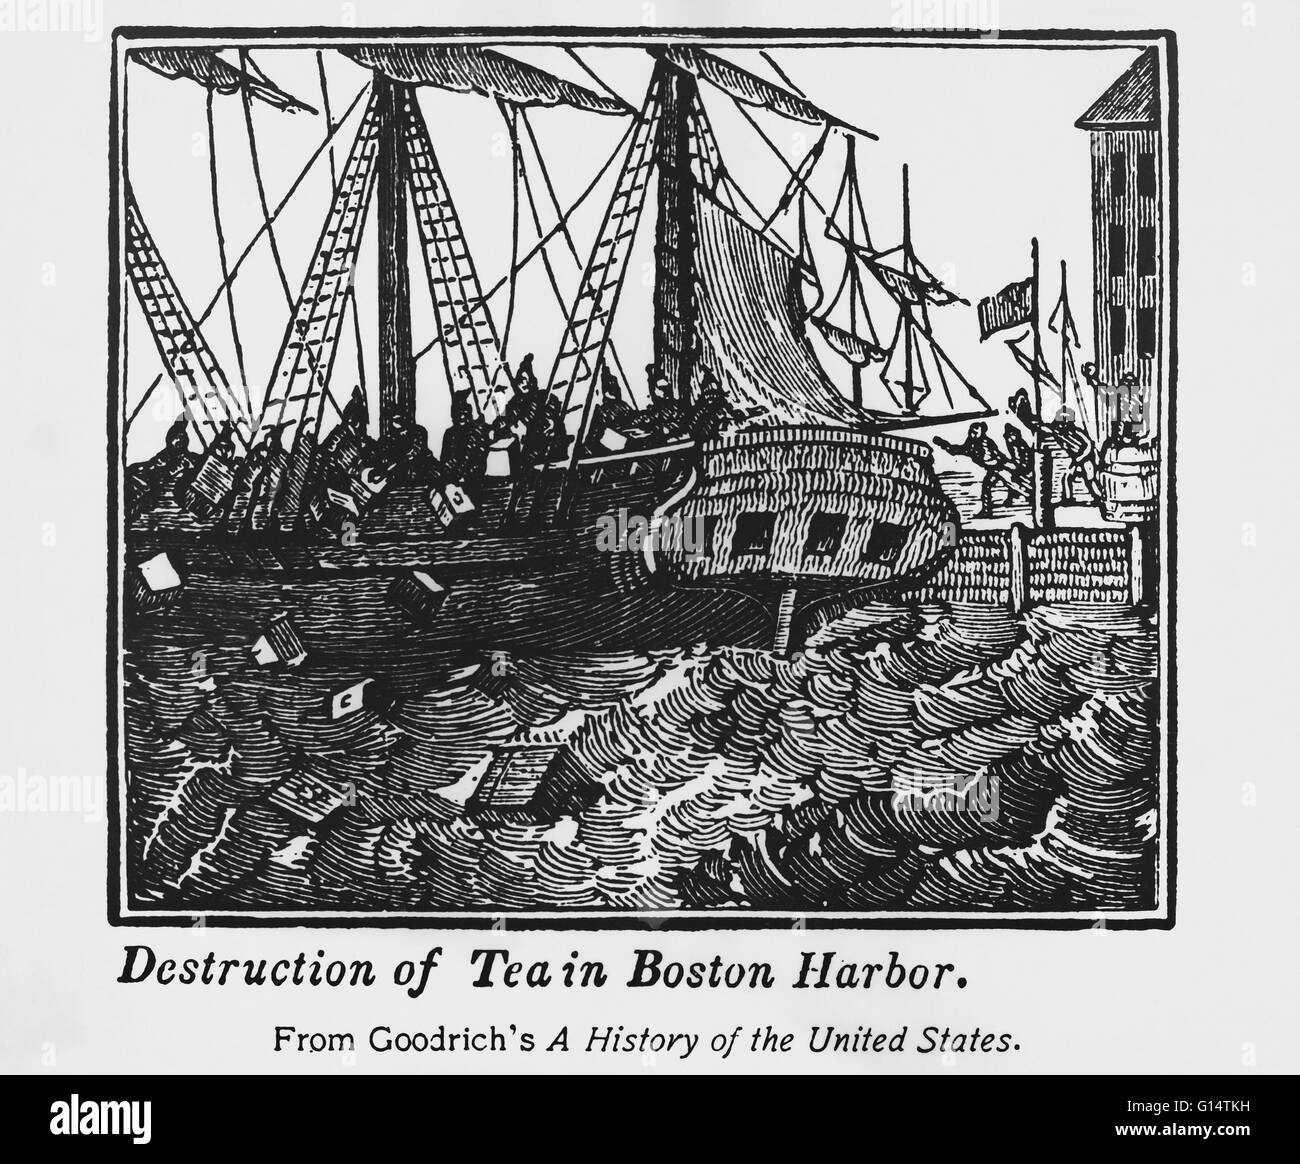 The Boston Tea Party was a direct action by colonists in Boston, a town in the British colony of Massachusetts, against the British government and the East India Company that controlled all the tea imported into the colonies. On December 16, 1773, after o Stock Photo